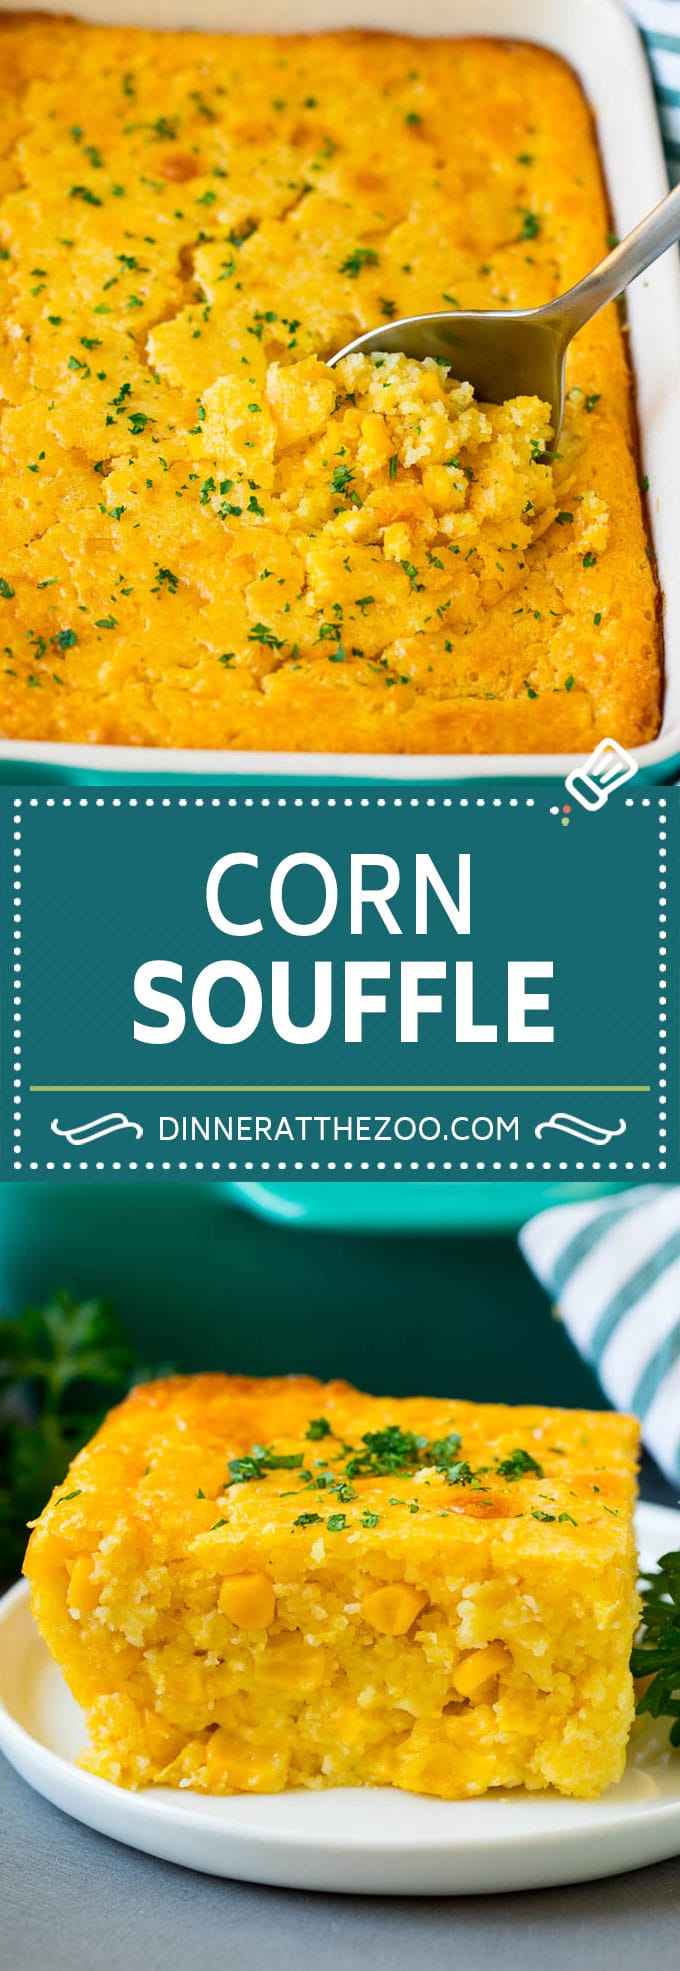 This corn souffle recipe is a flavorful blend of corn kernels, butter, eggs and creamed corn, all baked to light and fluffy perfection.